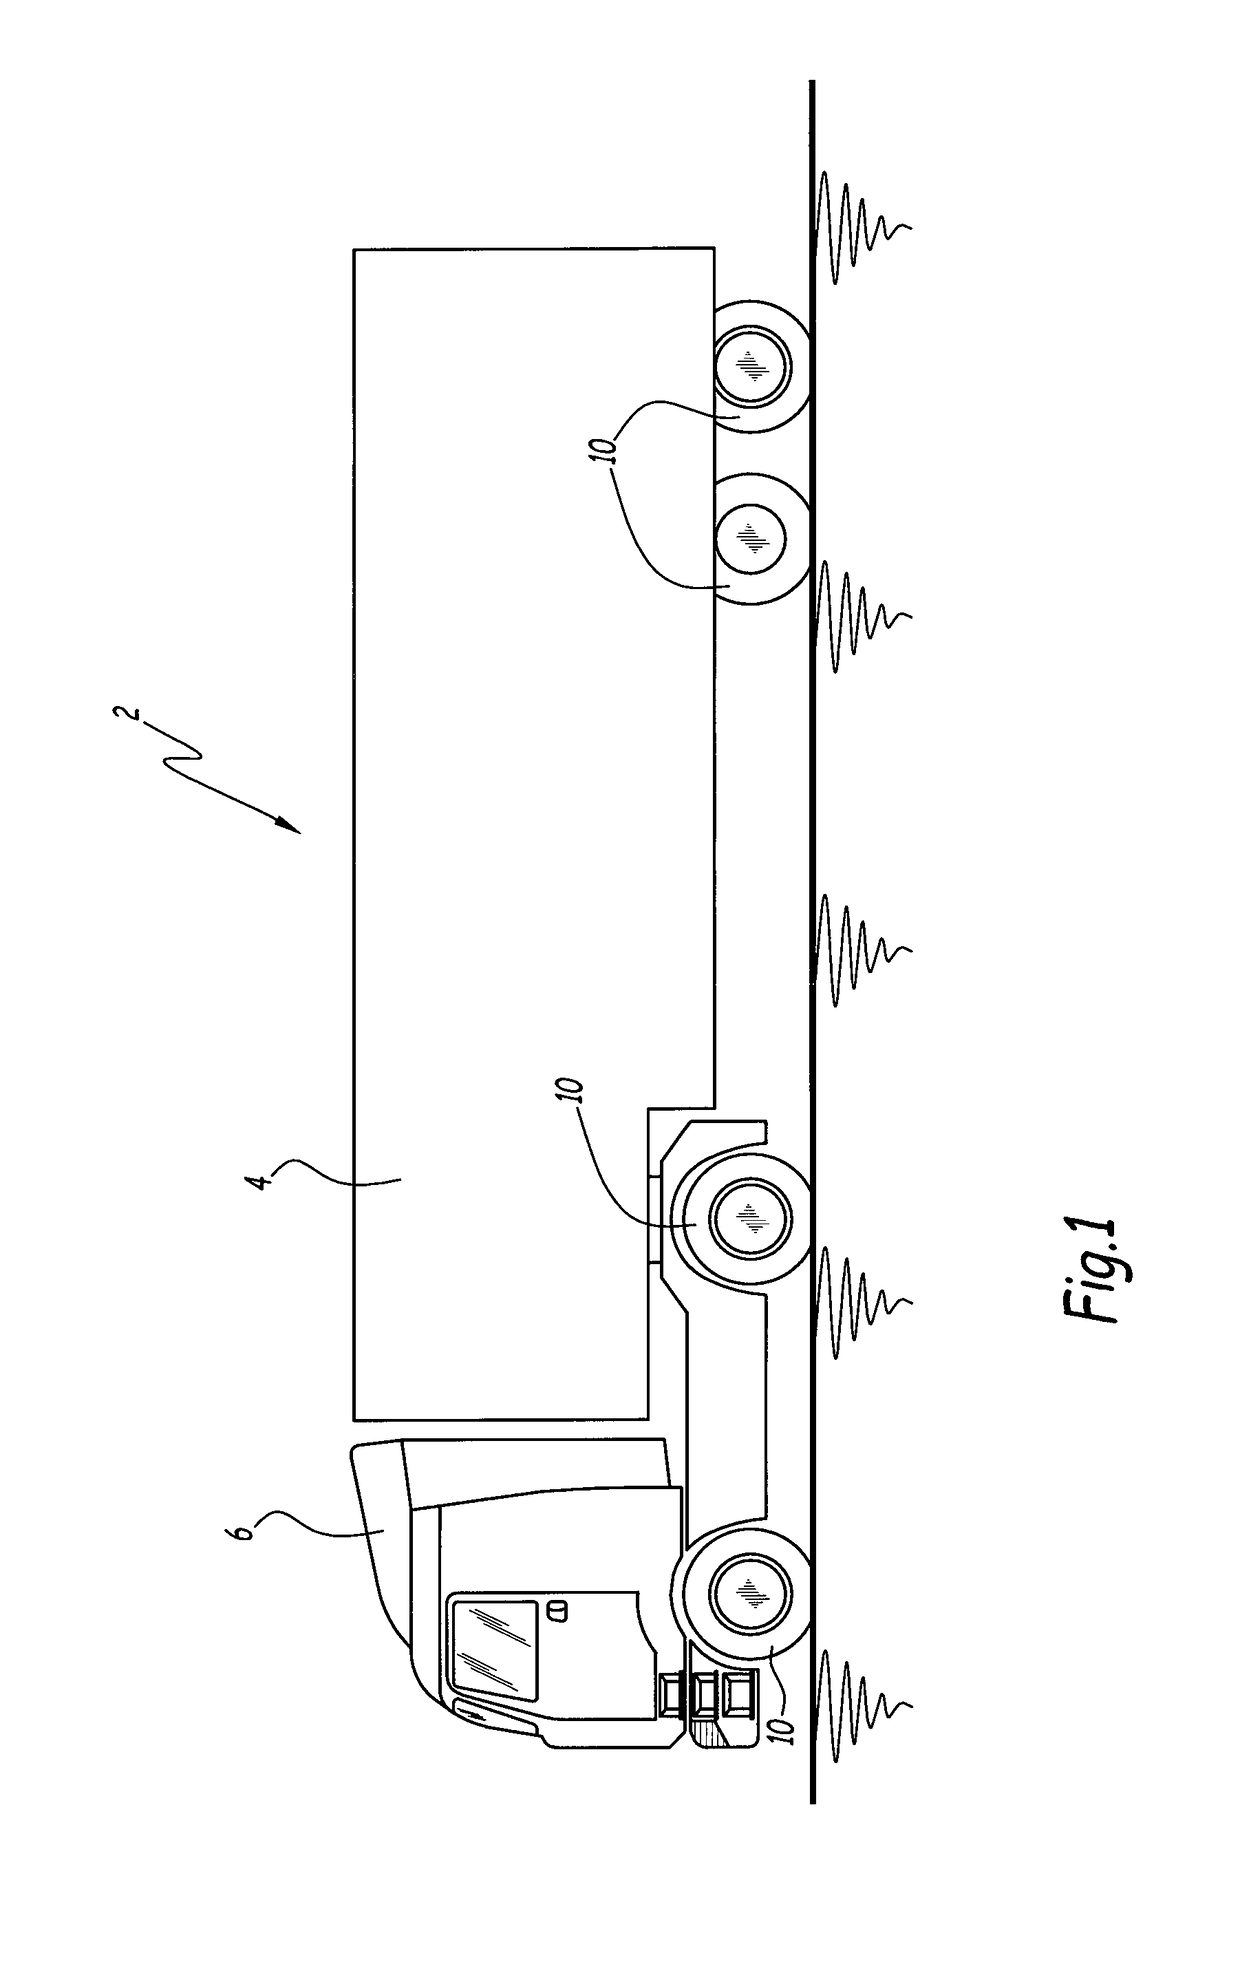 Self-fastened bracket for mounting a wire harness to a support structure of a vehicle and vehicle comprising the same